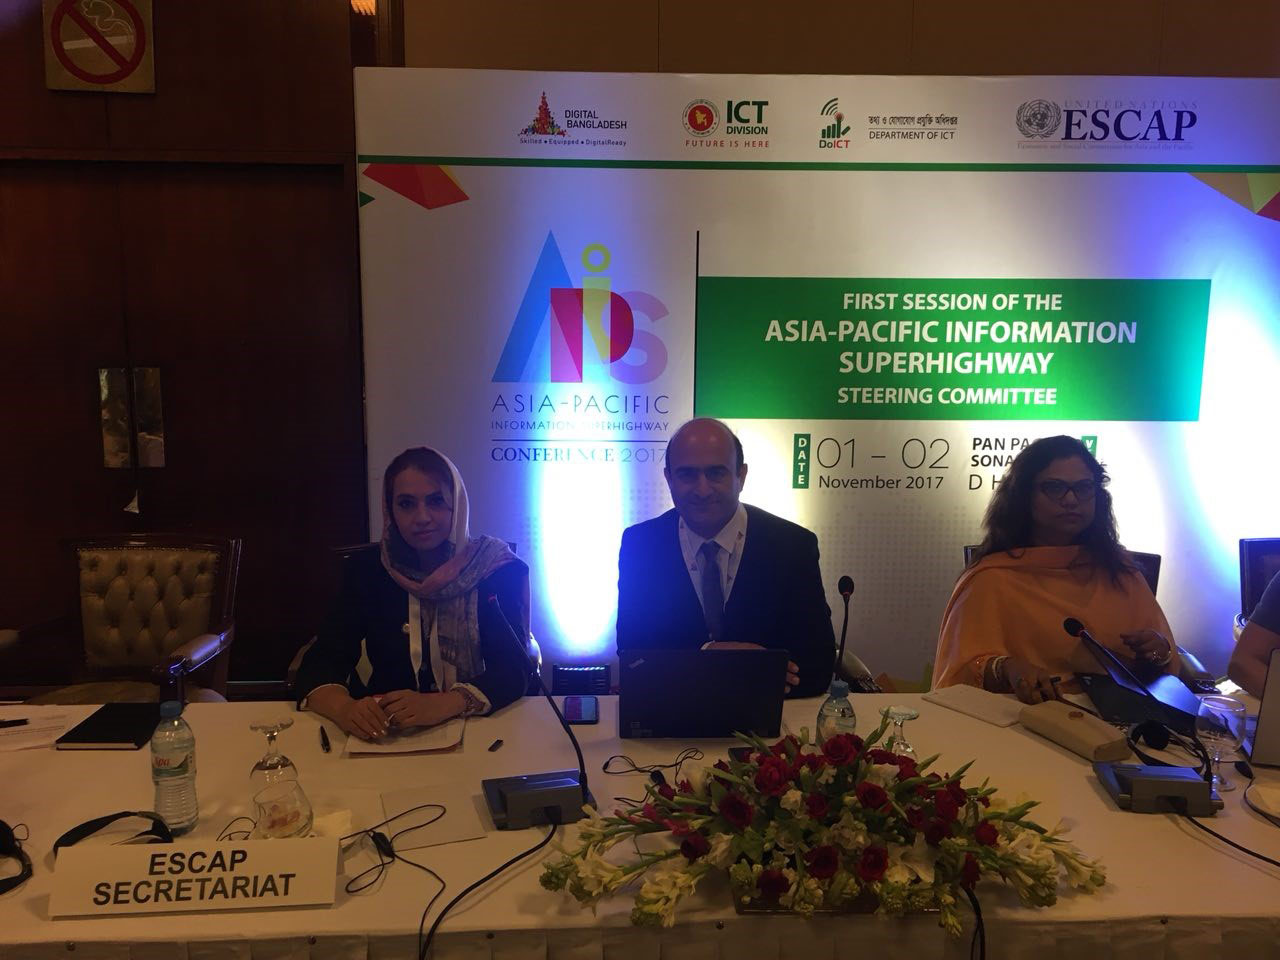 Monenco Iran at the “first session of Asia pacific information superhighway steering committee” in Bangladesh